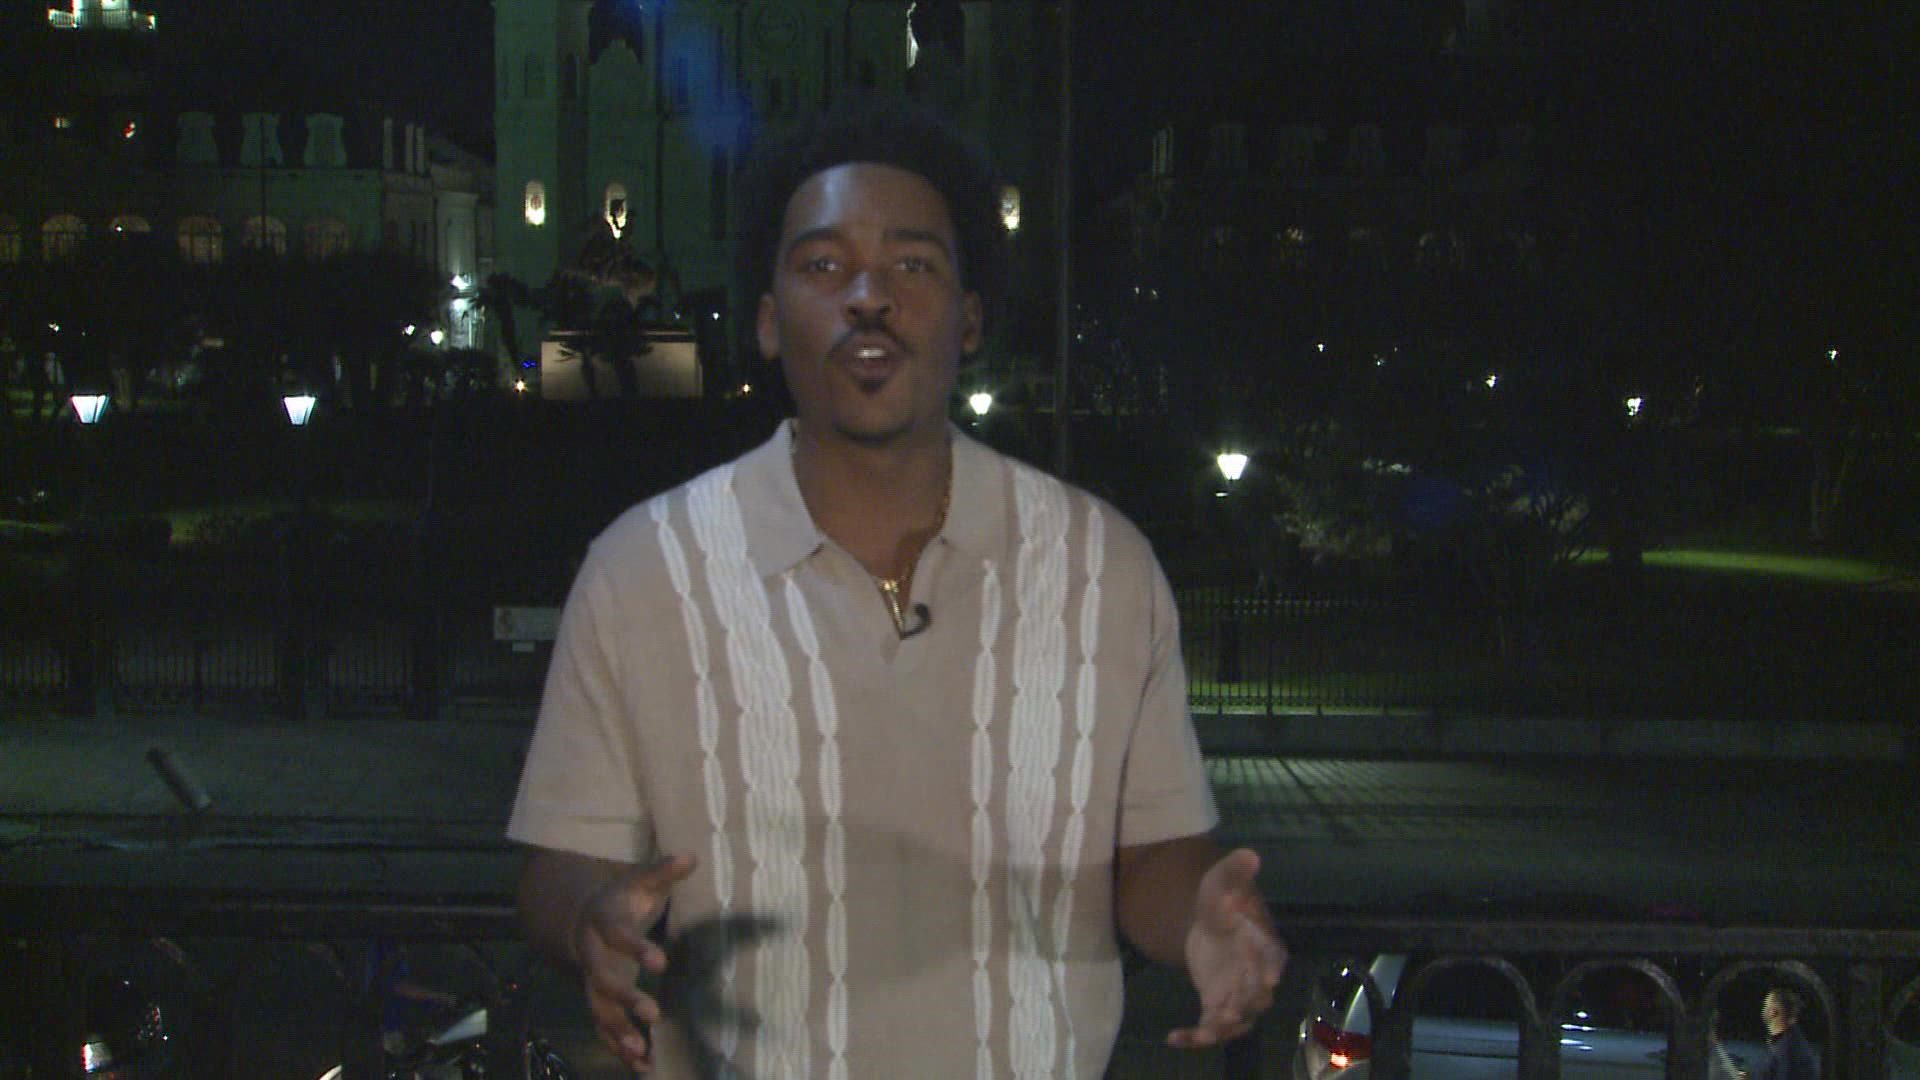 WFMY News 2’s Jaelen Gilkey takes us for the ride to New Orleans. It’s all about the journey to the big dance.